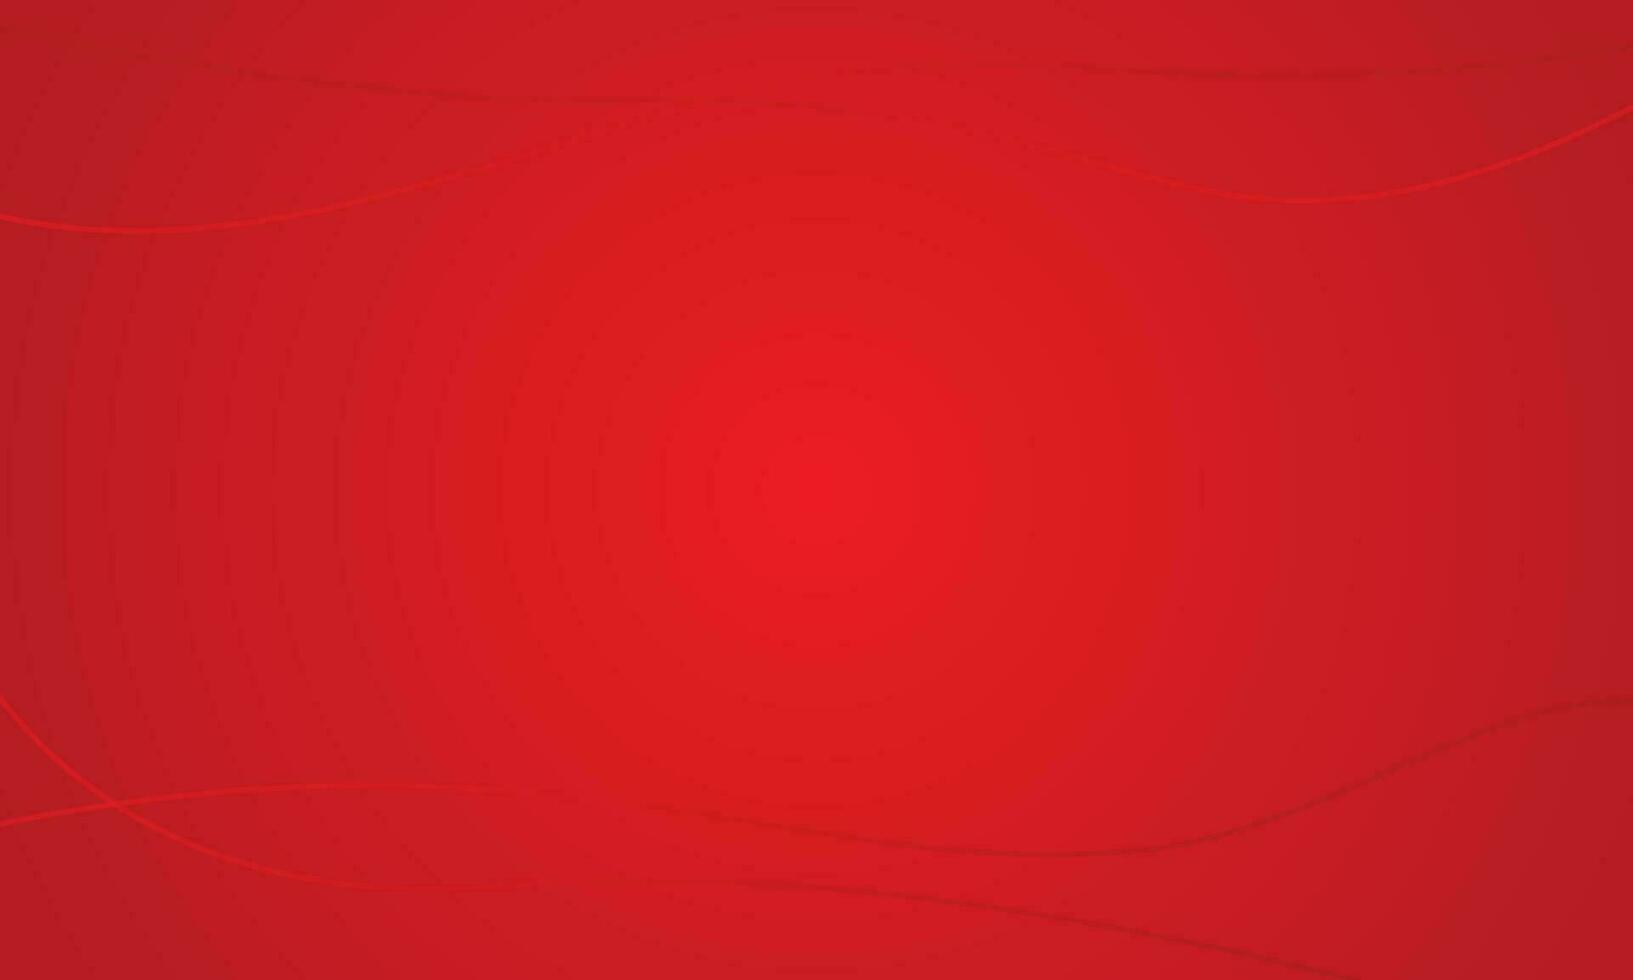 abstract red backround with gold line vector illustration